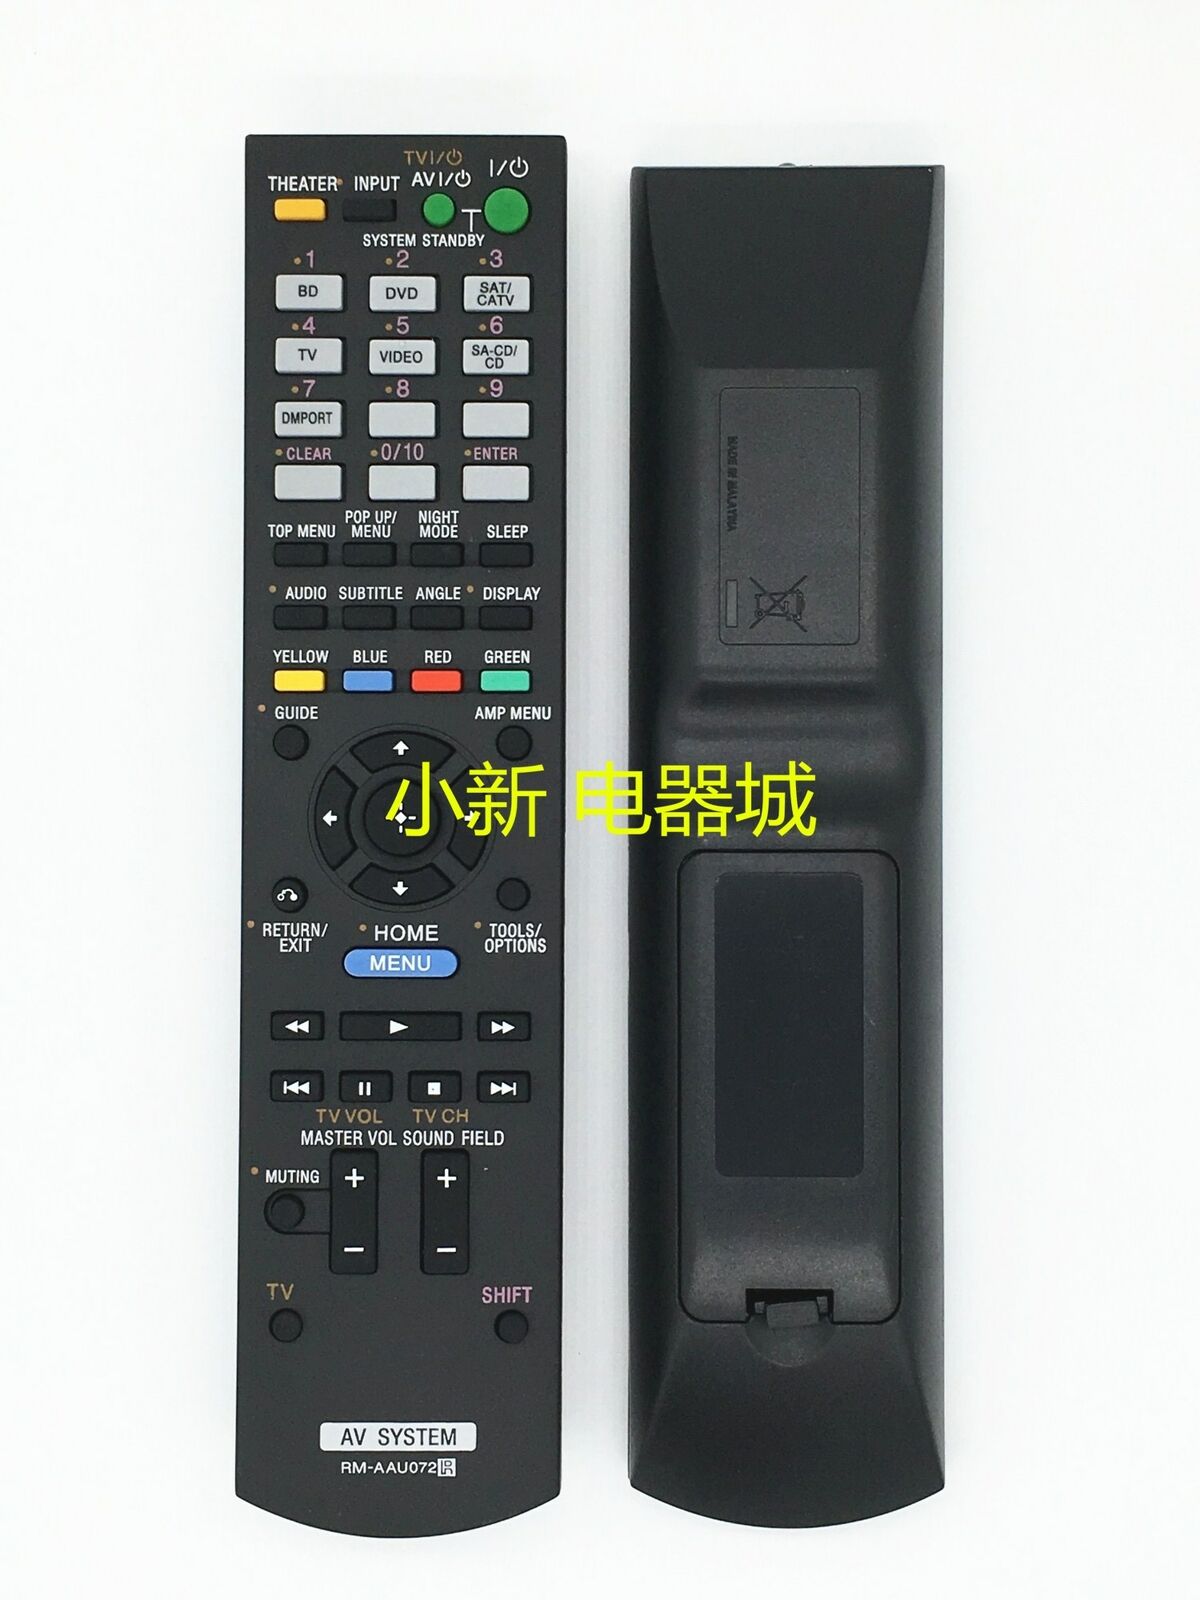 Remote Control RM-AAU072 for Sony Video Audio Brand: Sony Type: Remote Control Model: RM-AAU072 Compatible Brand: